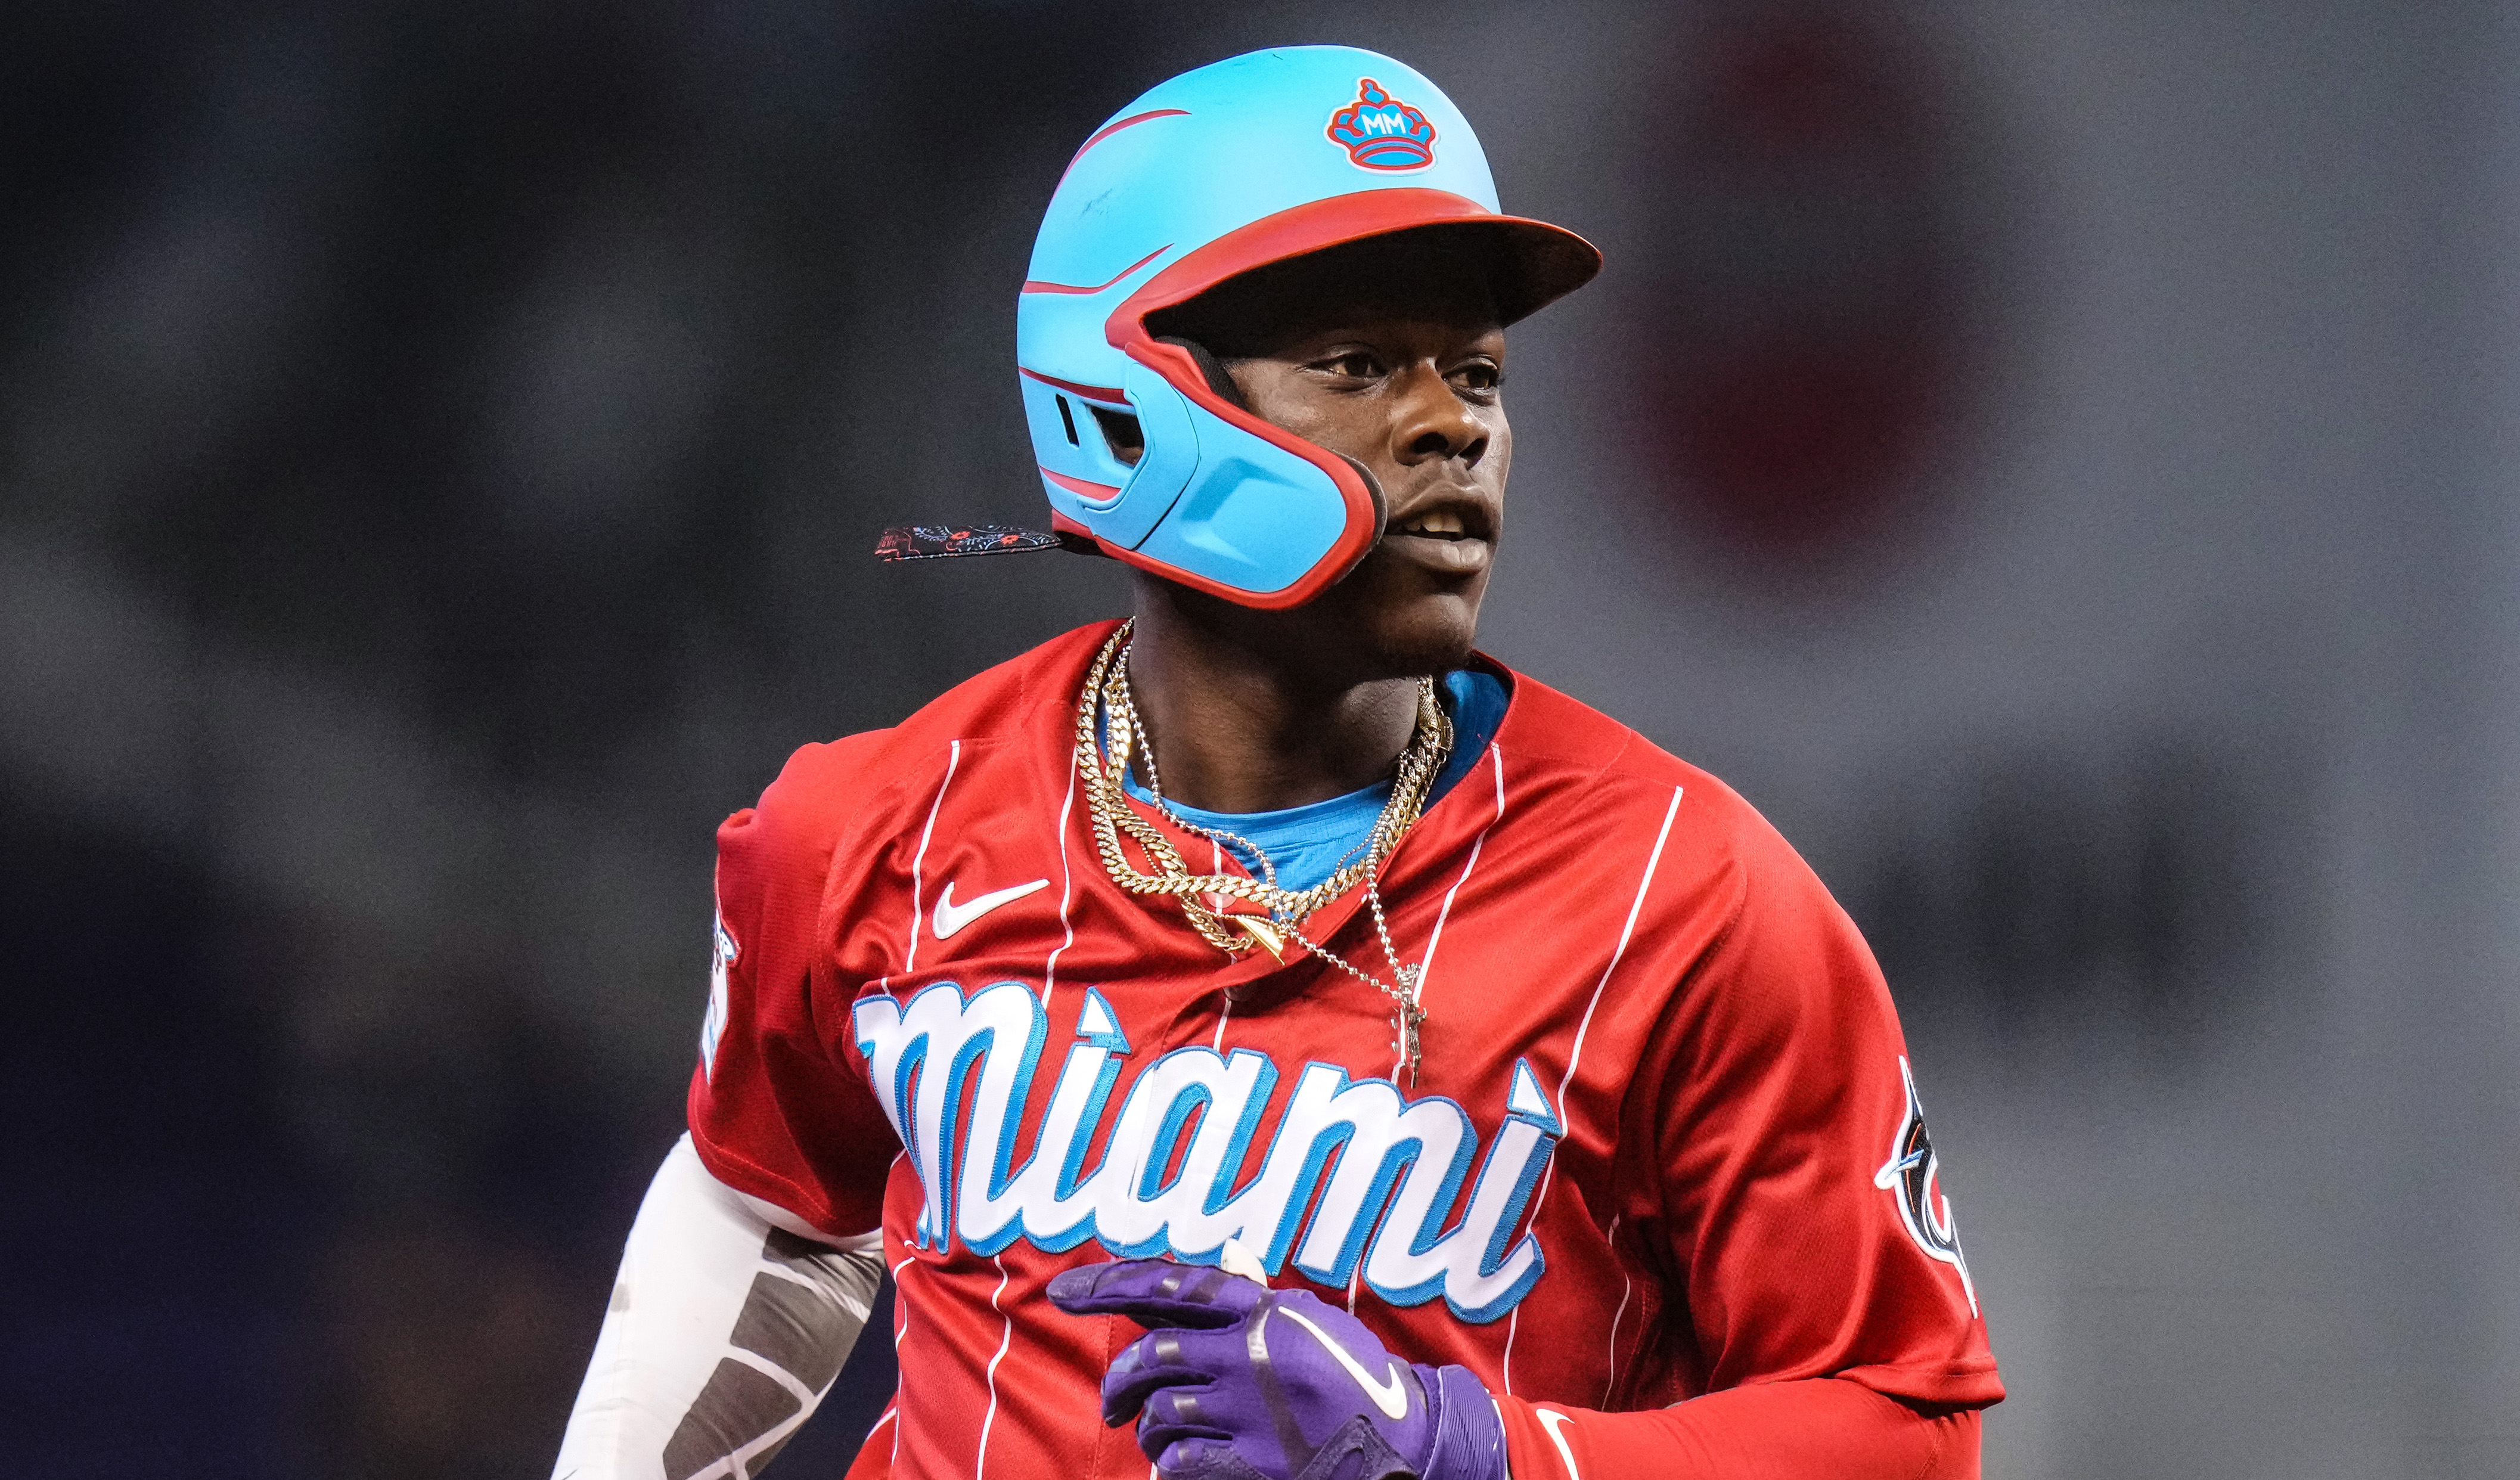 Potential MLB Breakout Players for 2022